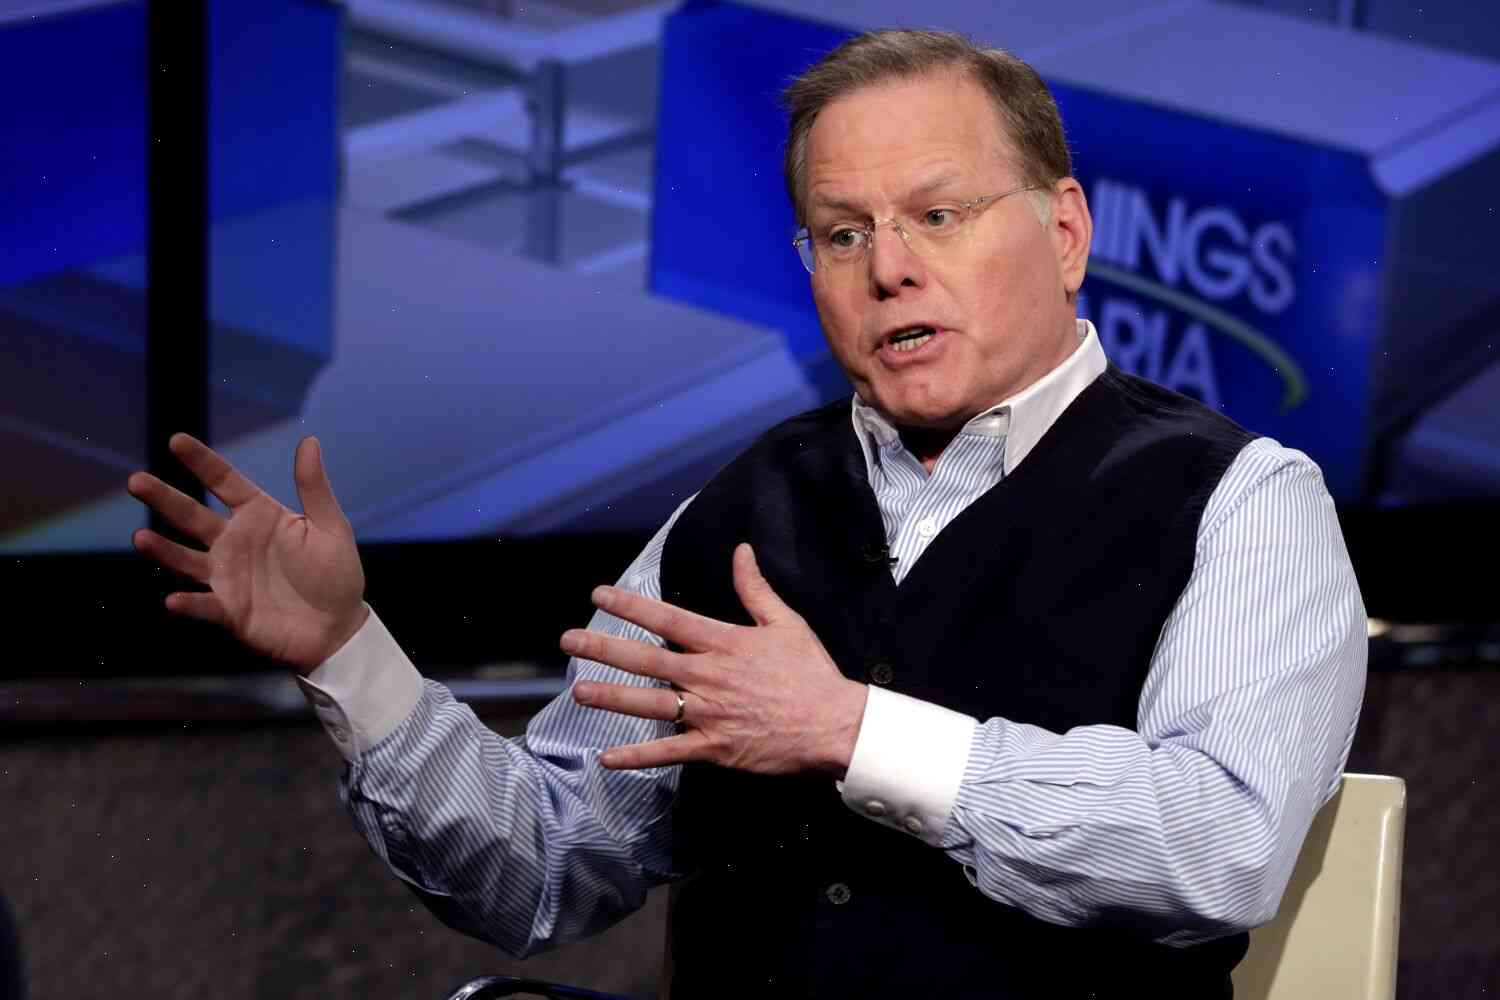 Discovery Communications is running out of cash